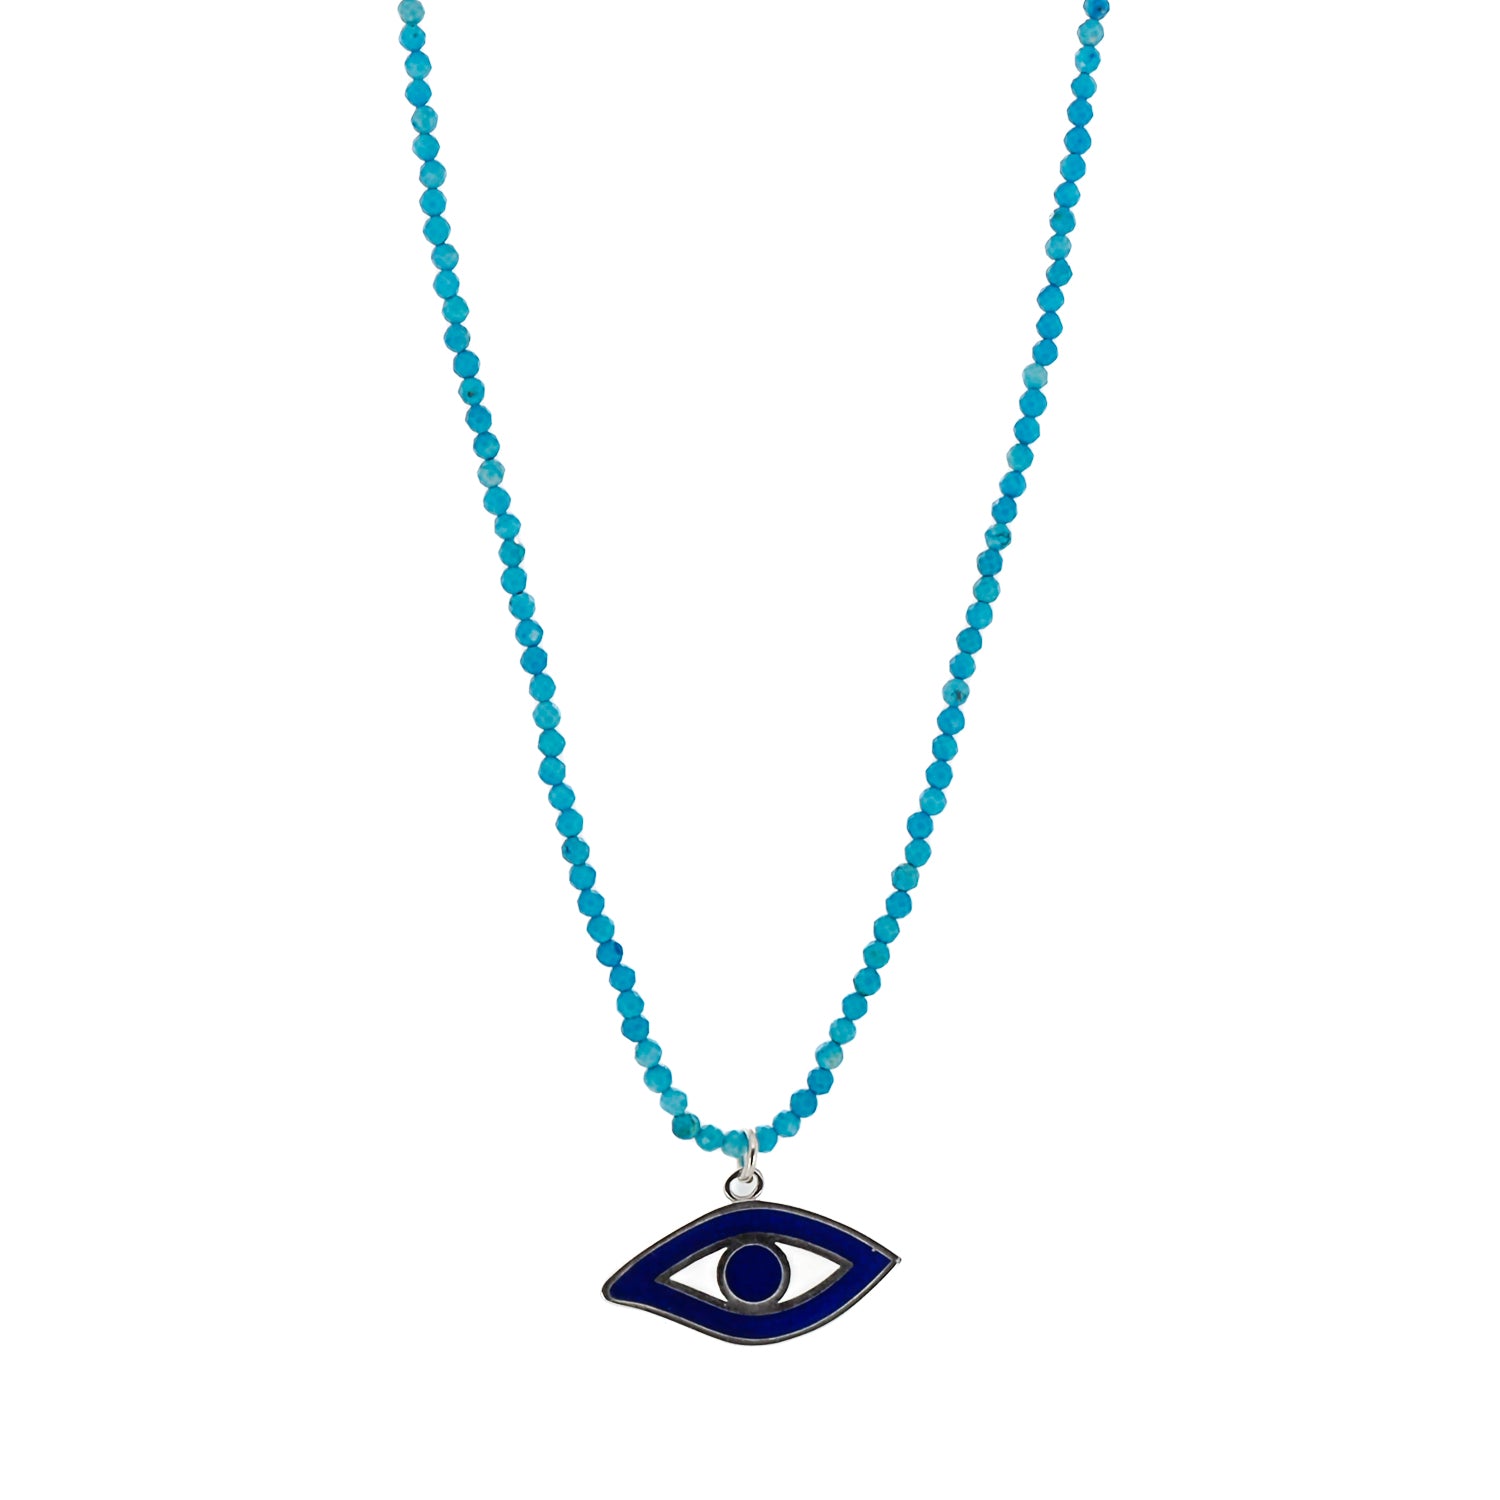 Handmade necklace featuring a stunning turquoise Evil Eye charm and natural turquoise stone beads for protection and good luck.